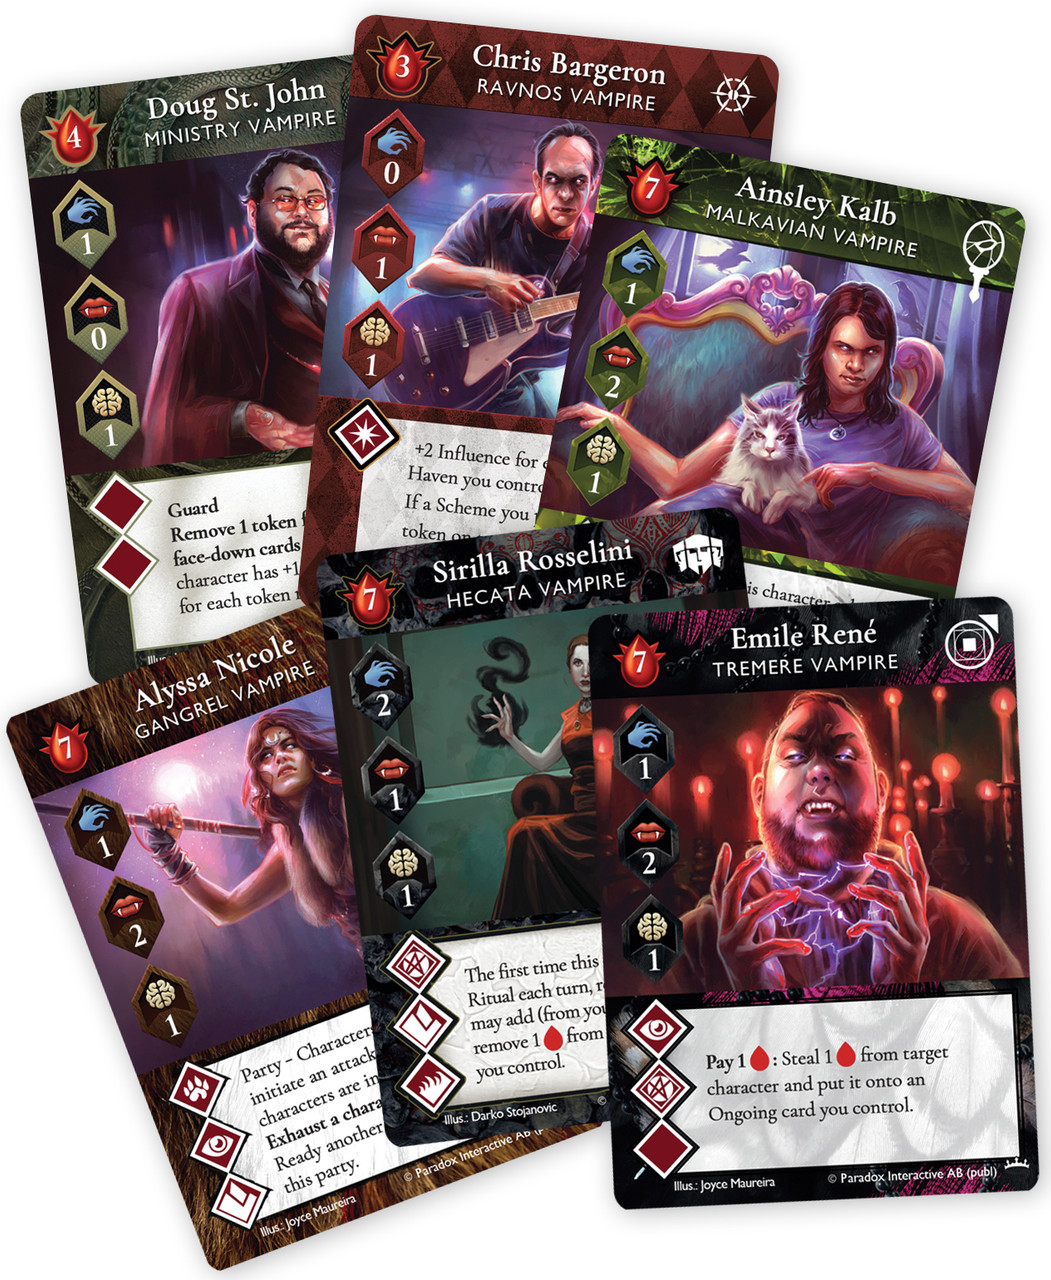 Vampire: The Masquerade Rivals Expandable Card Game Royalty Pack 1